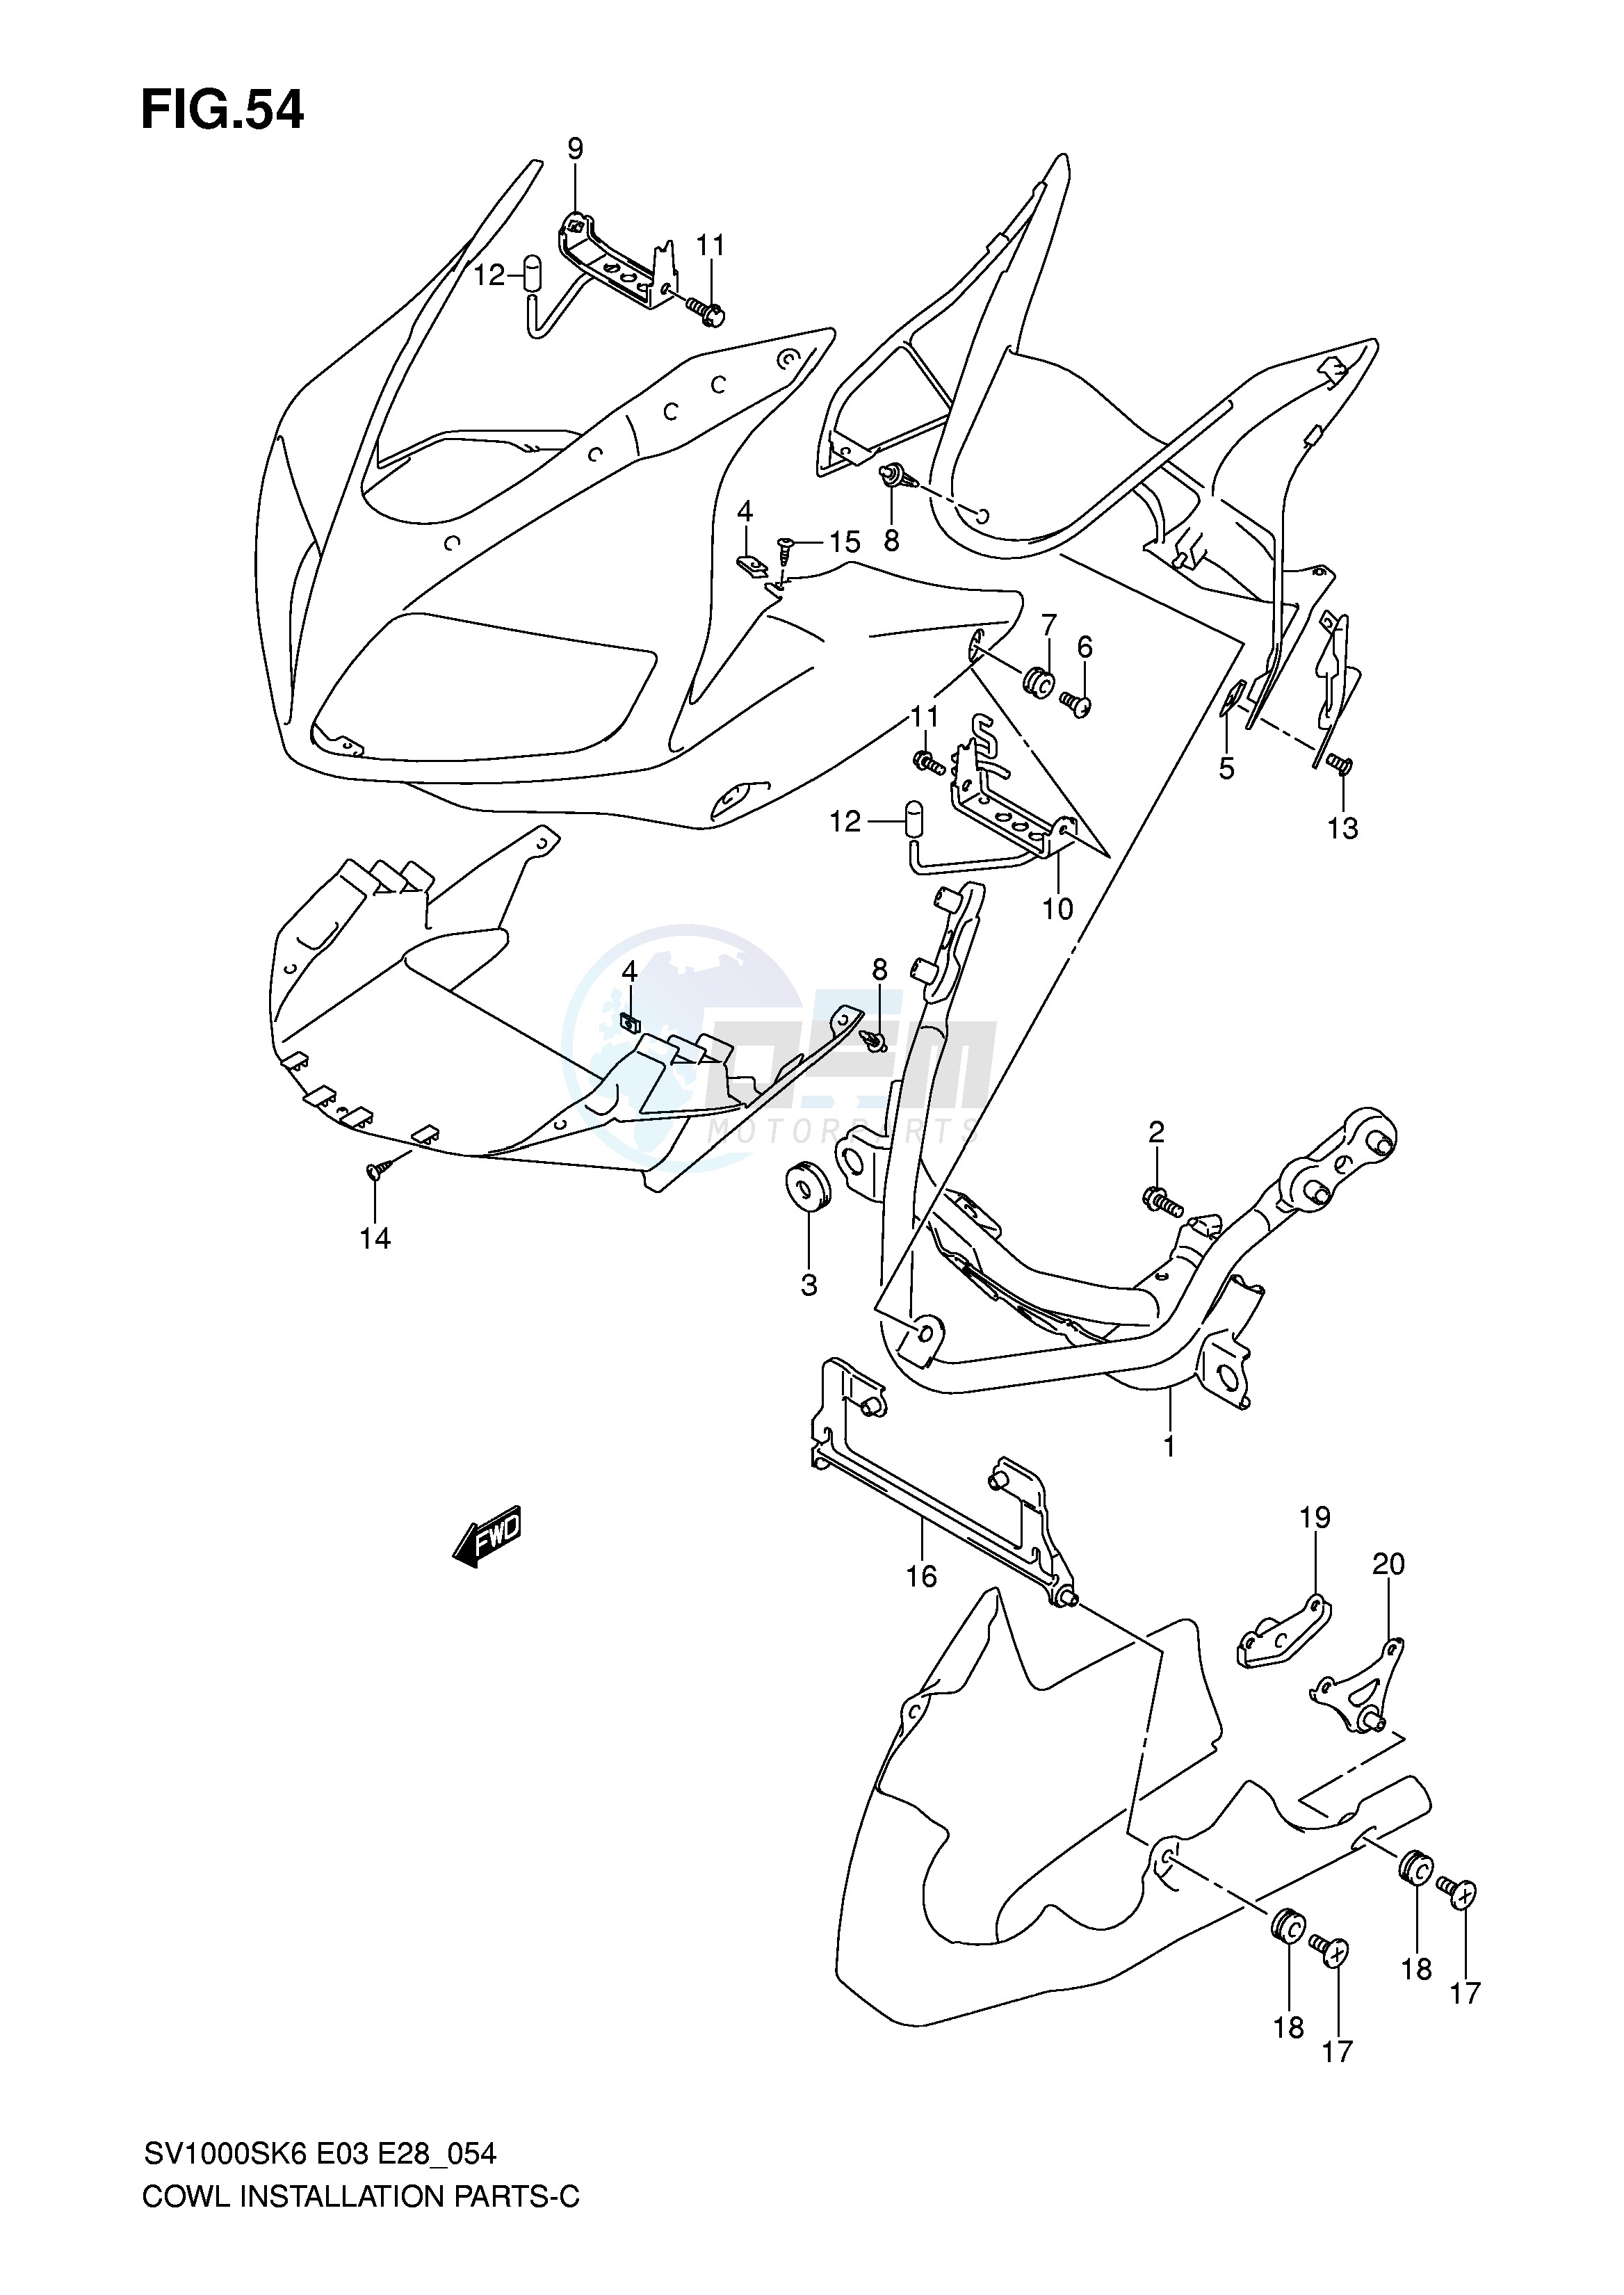 COWLING INSTALLATION PARTS (SV1000S) blueprint